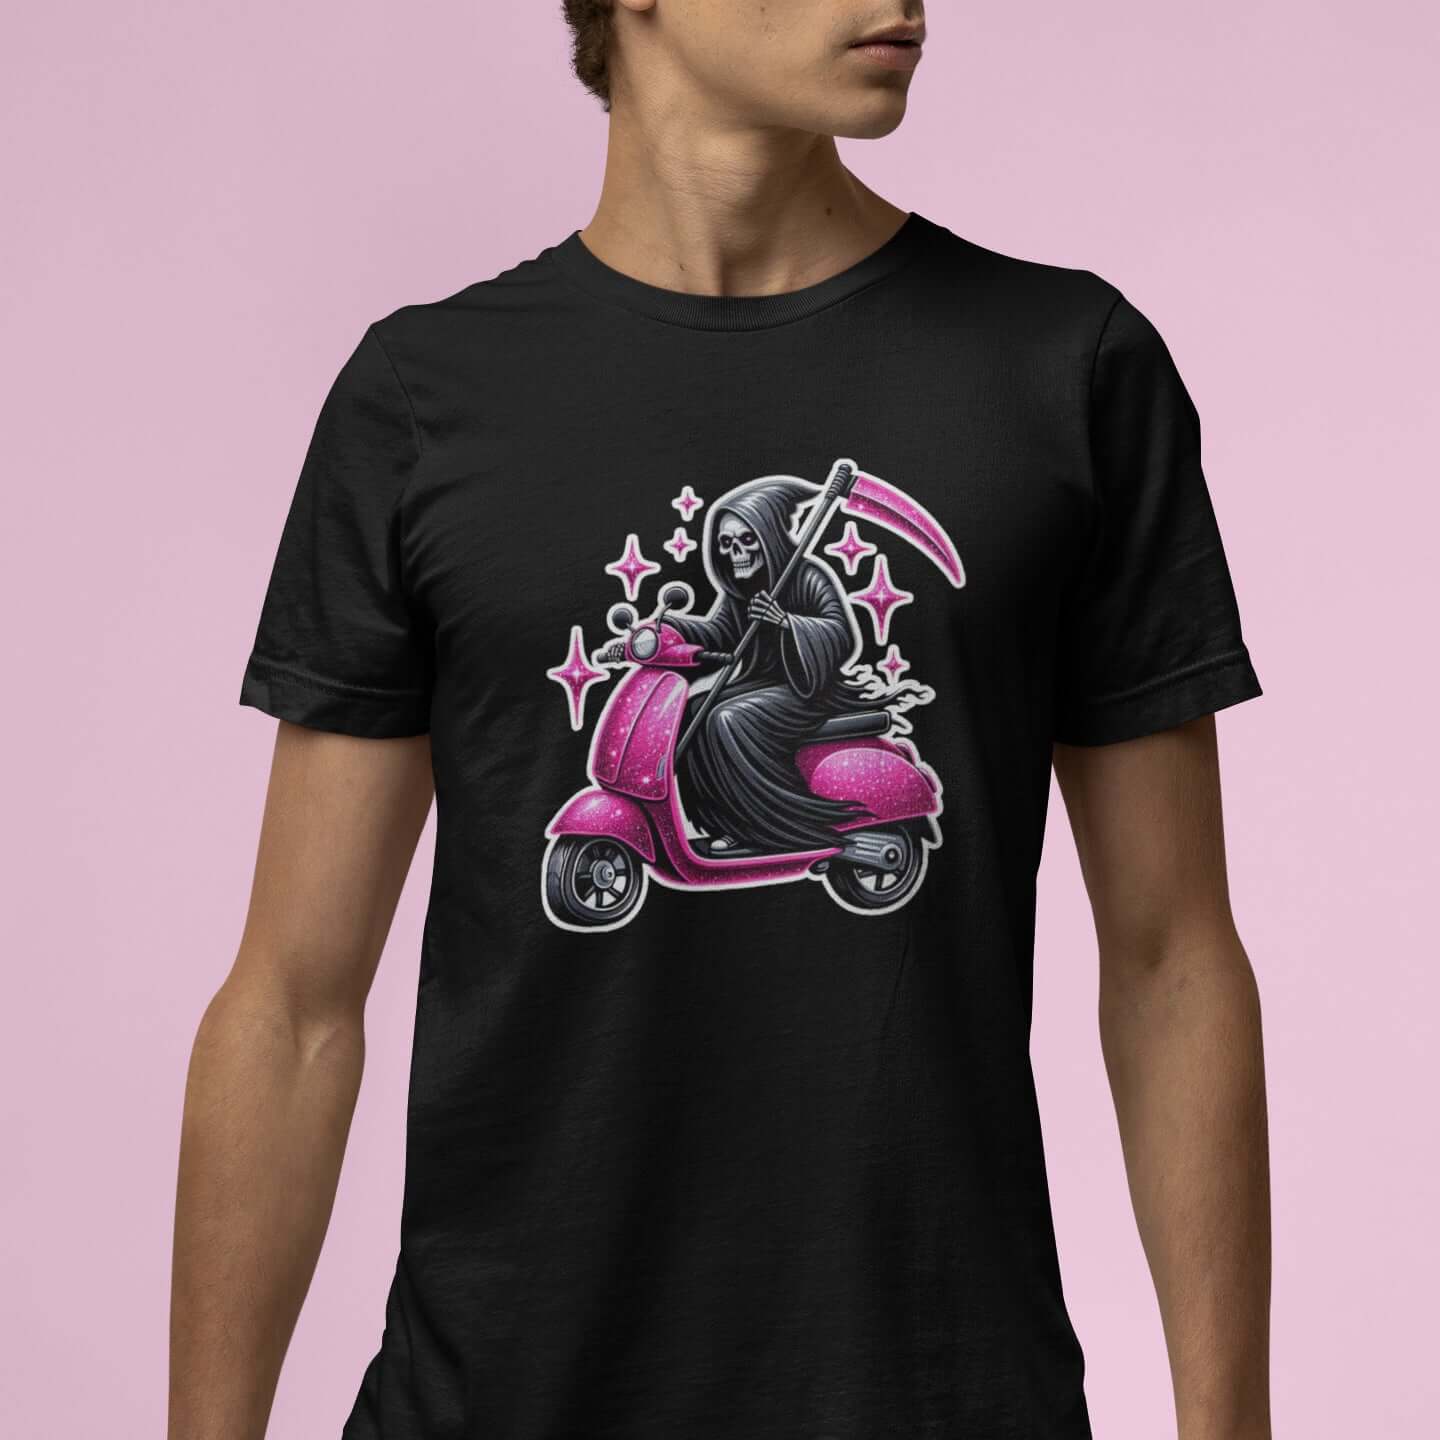 Man wearing black t-shirt with an image of the Grim Reaper riding on a glam pink scooter printed on the front.